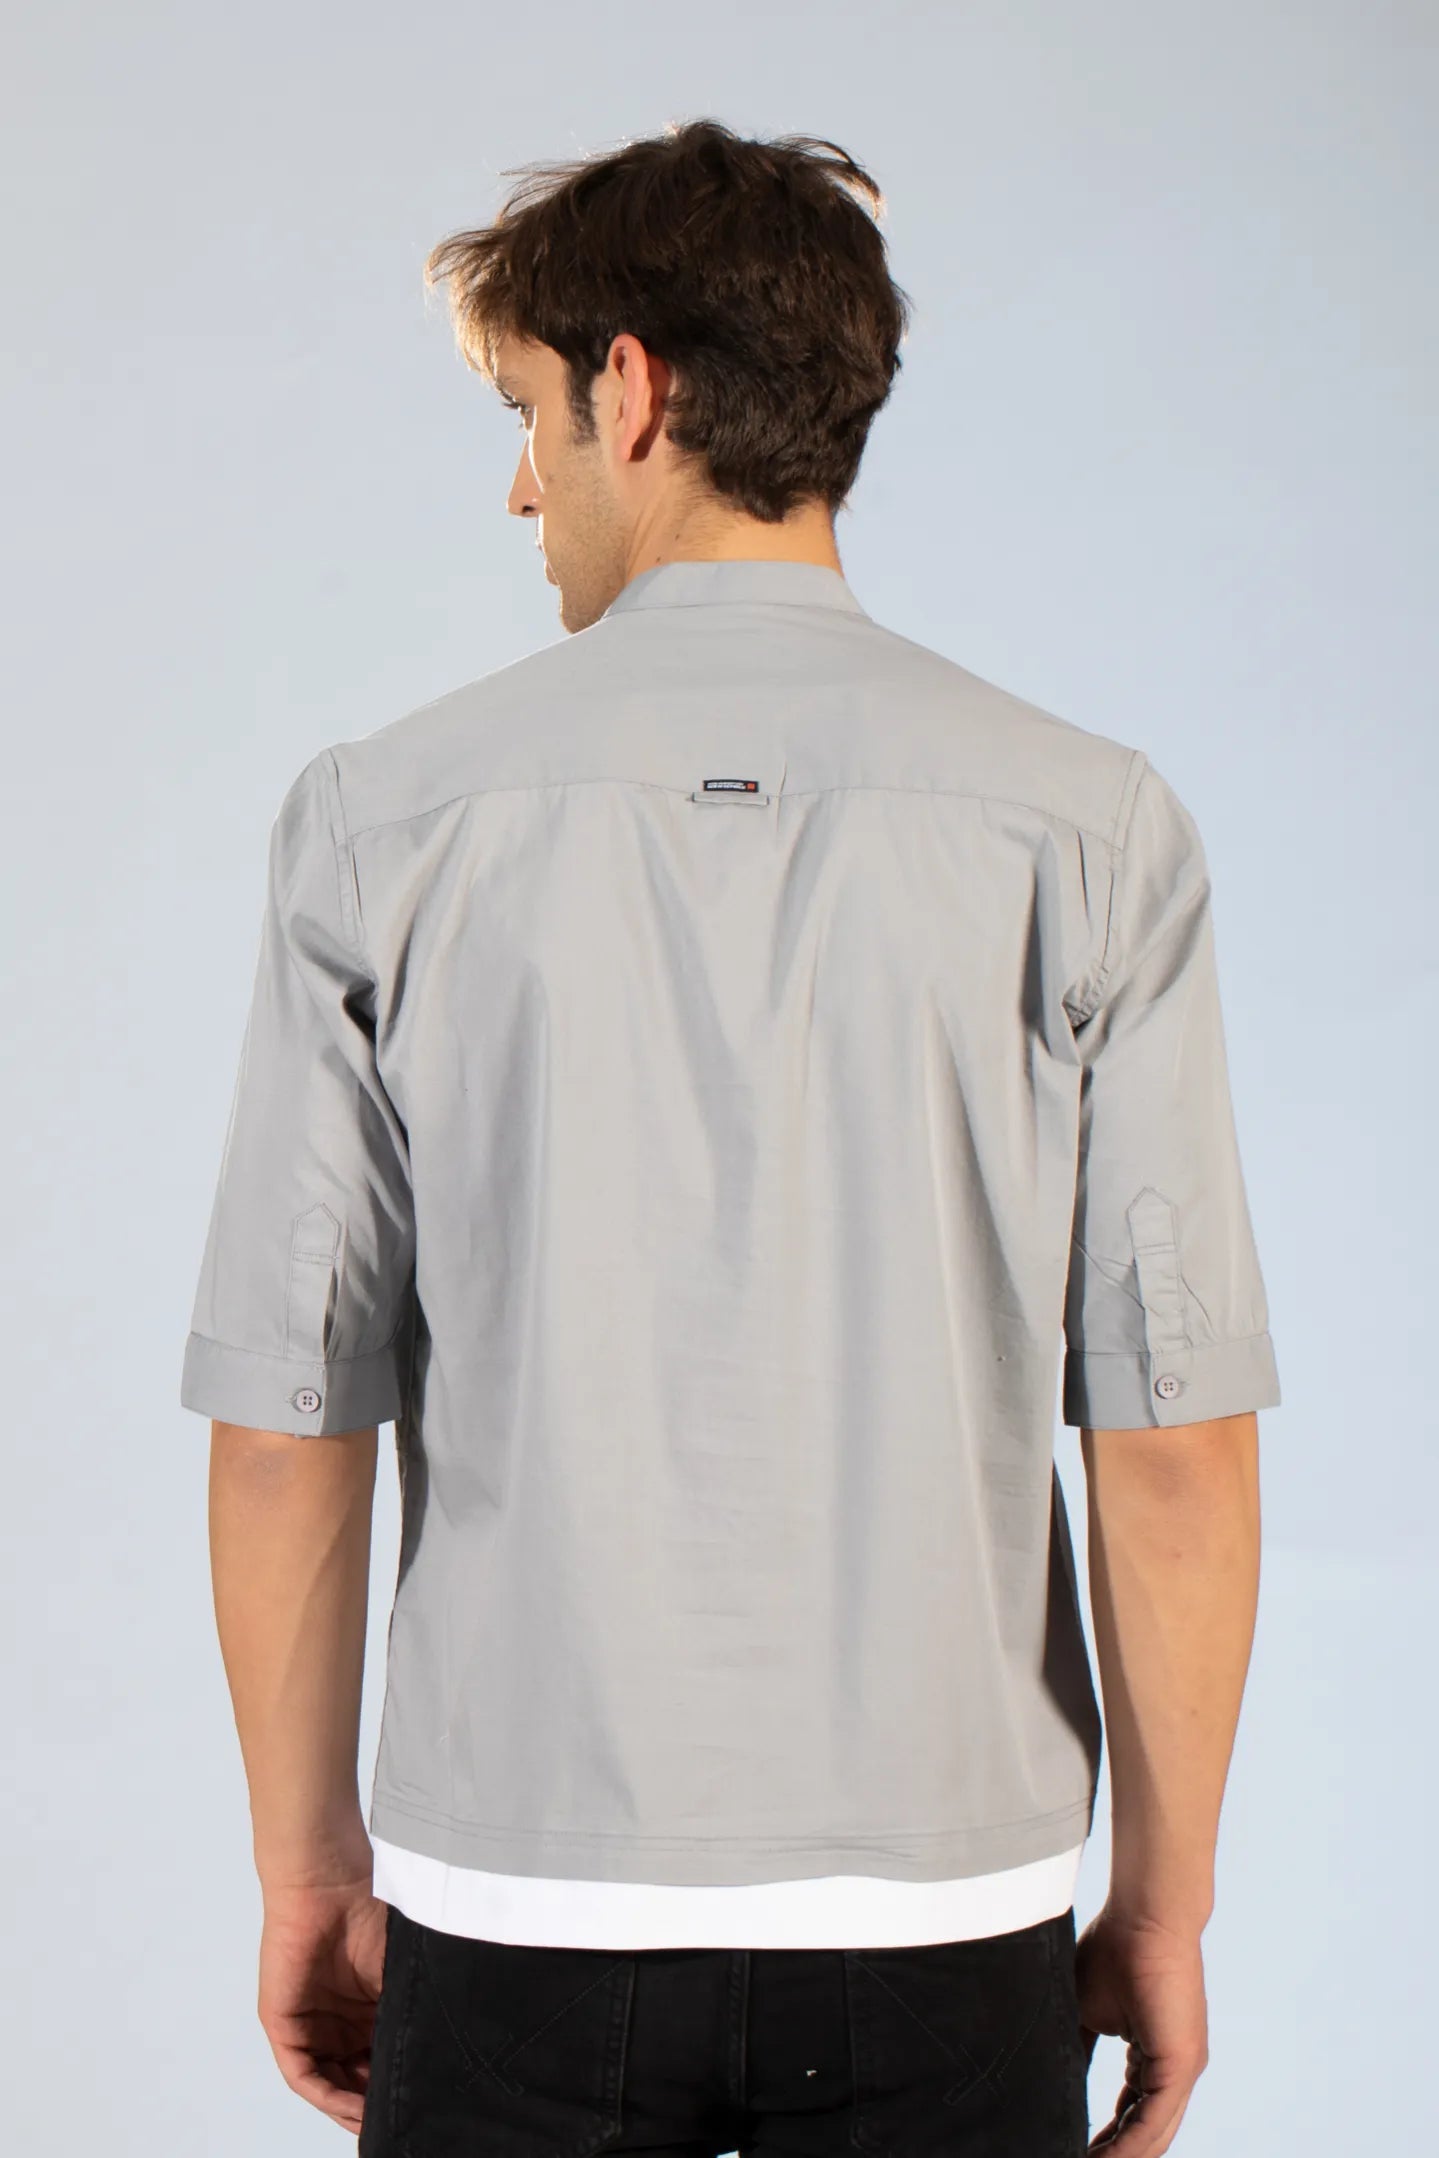 Buy Chinese Collar Five Sleeve Shirt Online.